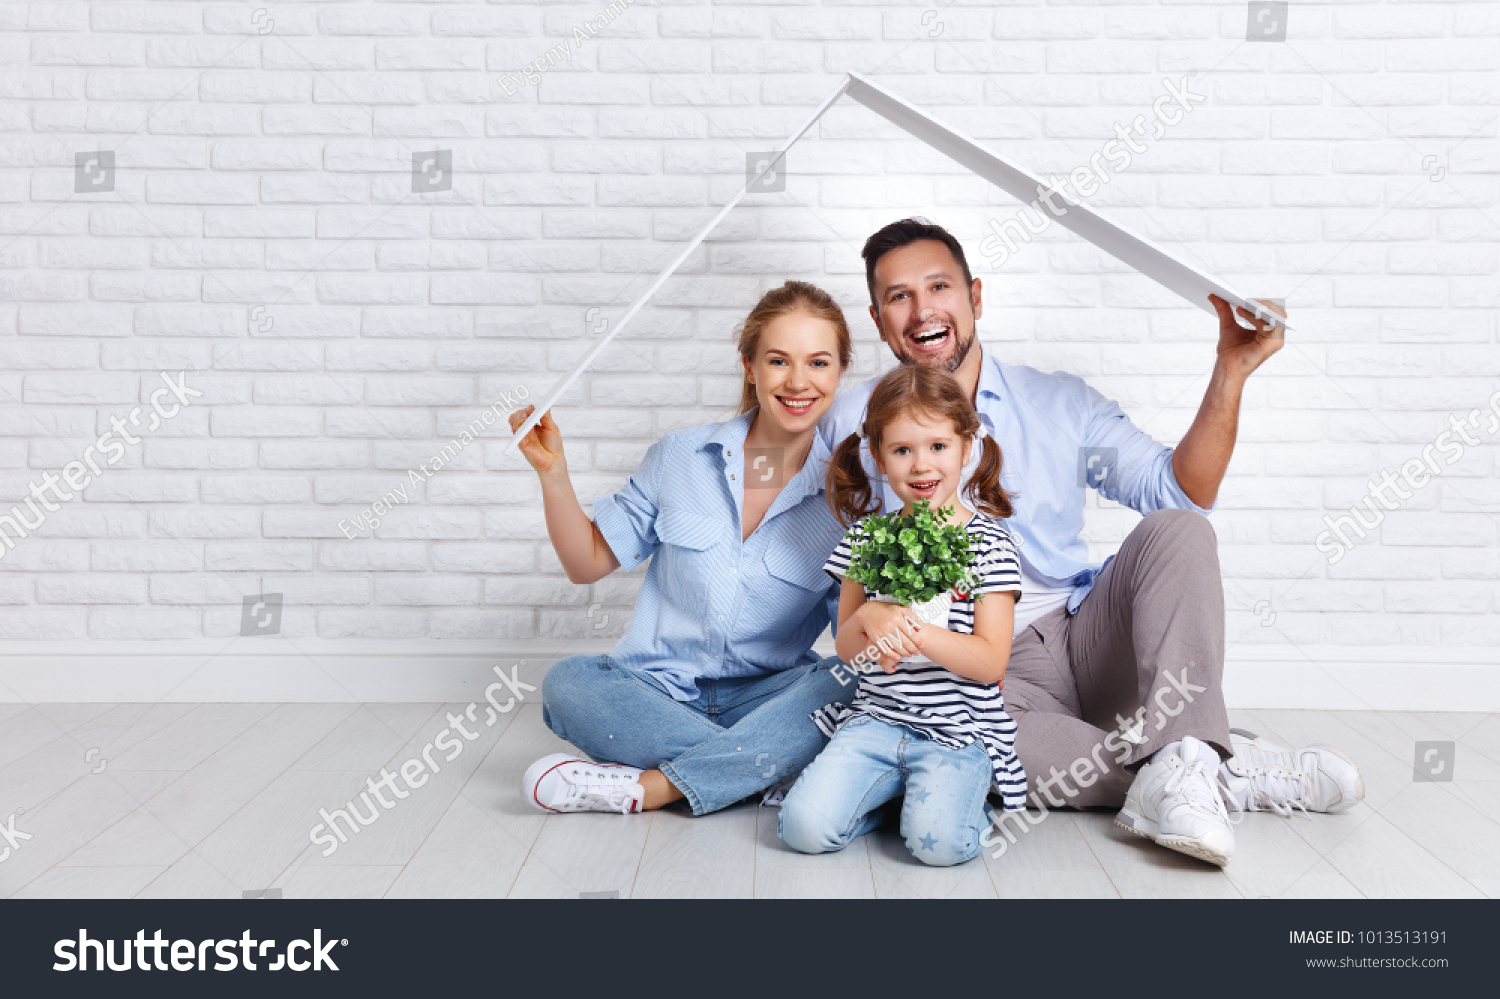 concept housing a young family. Mother father and child in new house with a roof at empty brick wall
 #1013513191